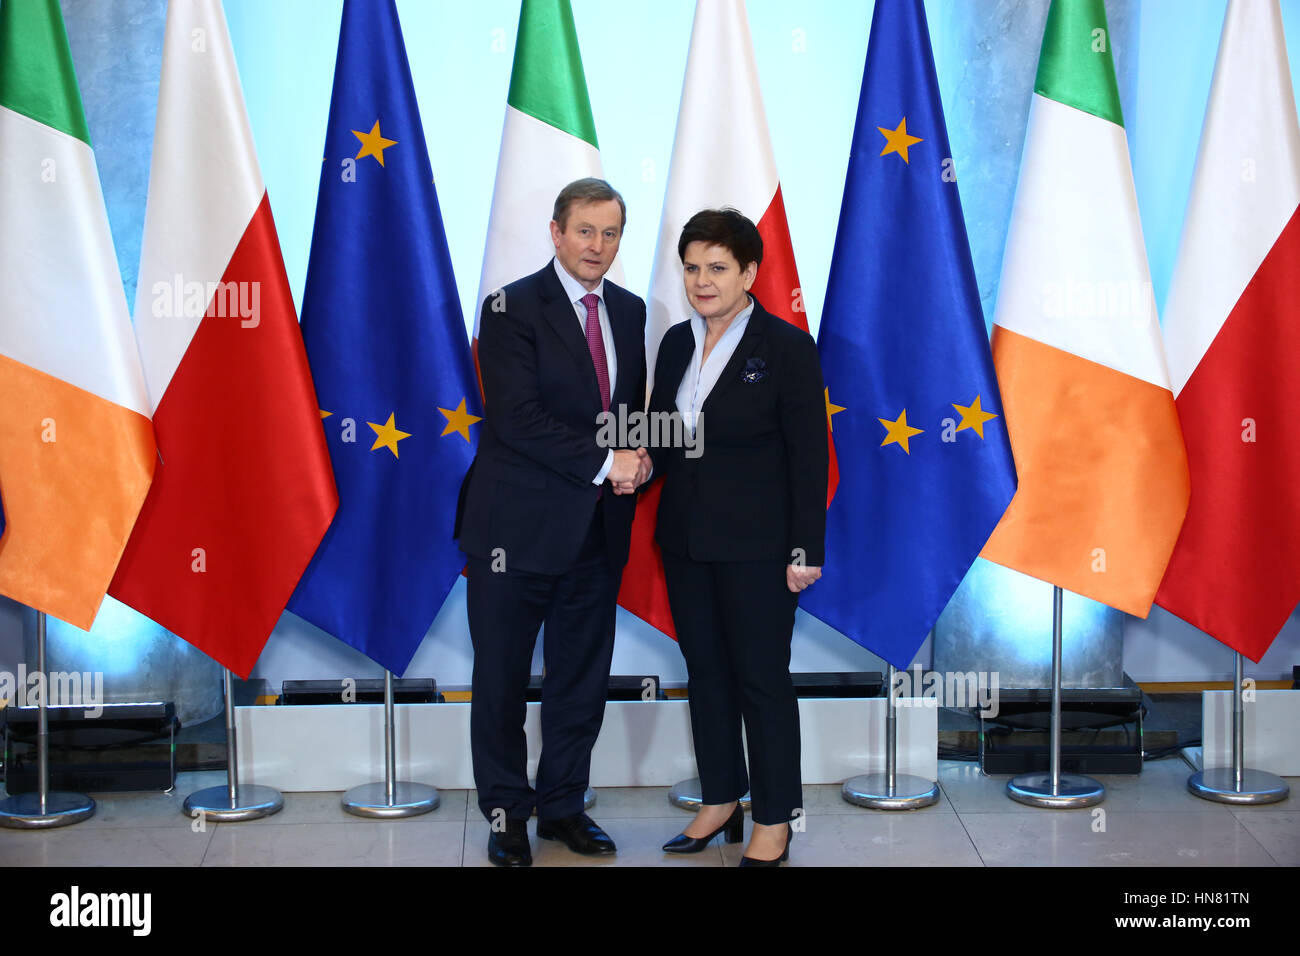 Warsaw, Poland. 9th Feb, 2017. Irish Prime Minister Enda Kenny was received by PM Beata Szydlo for official visit. Credit: Jake Ratz/Alamy Live News Stock Photo